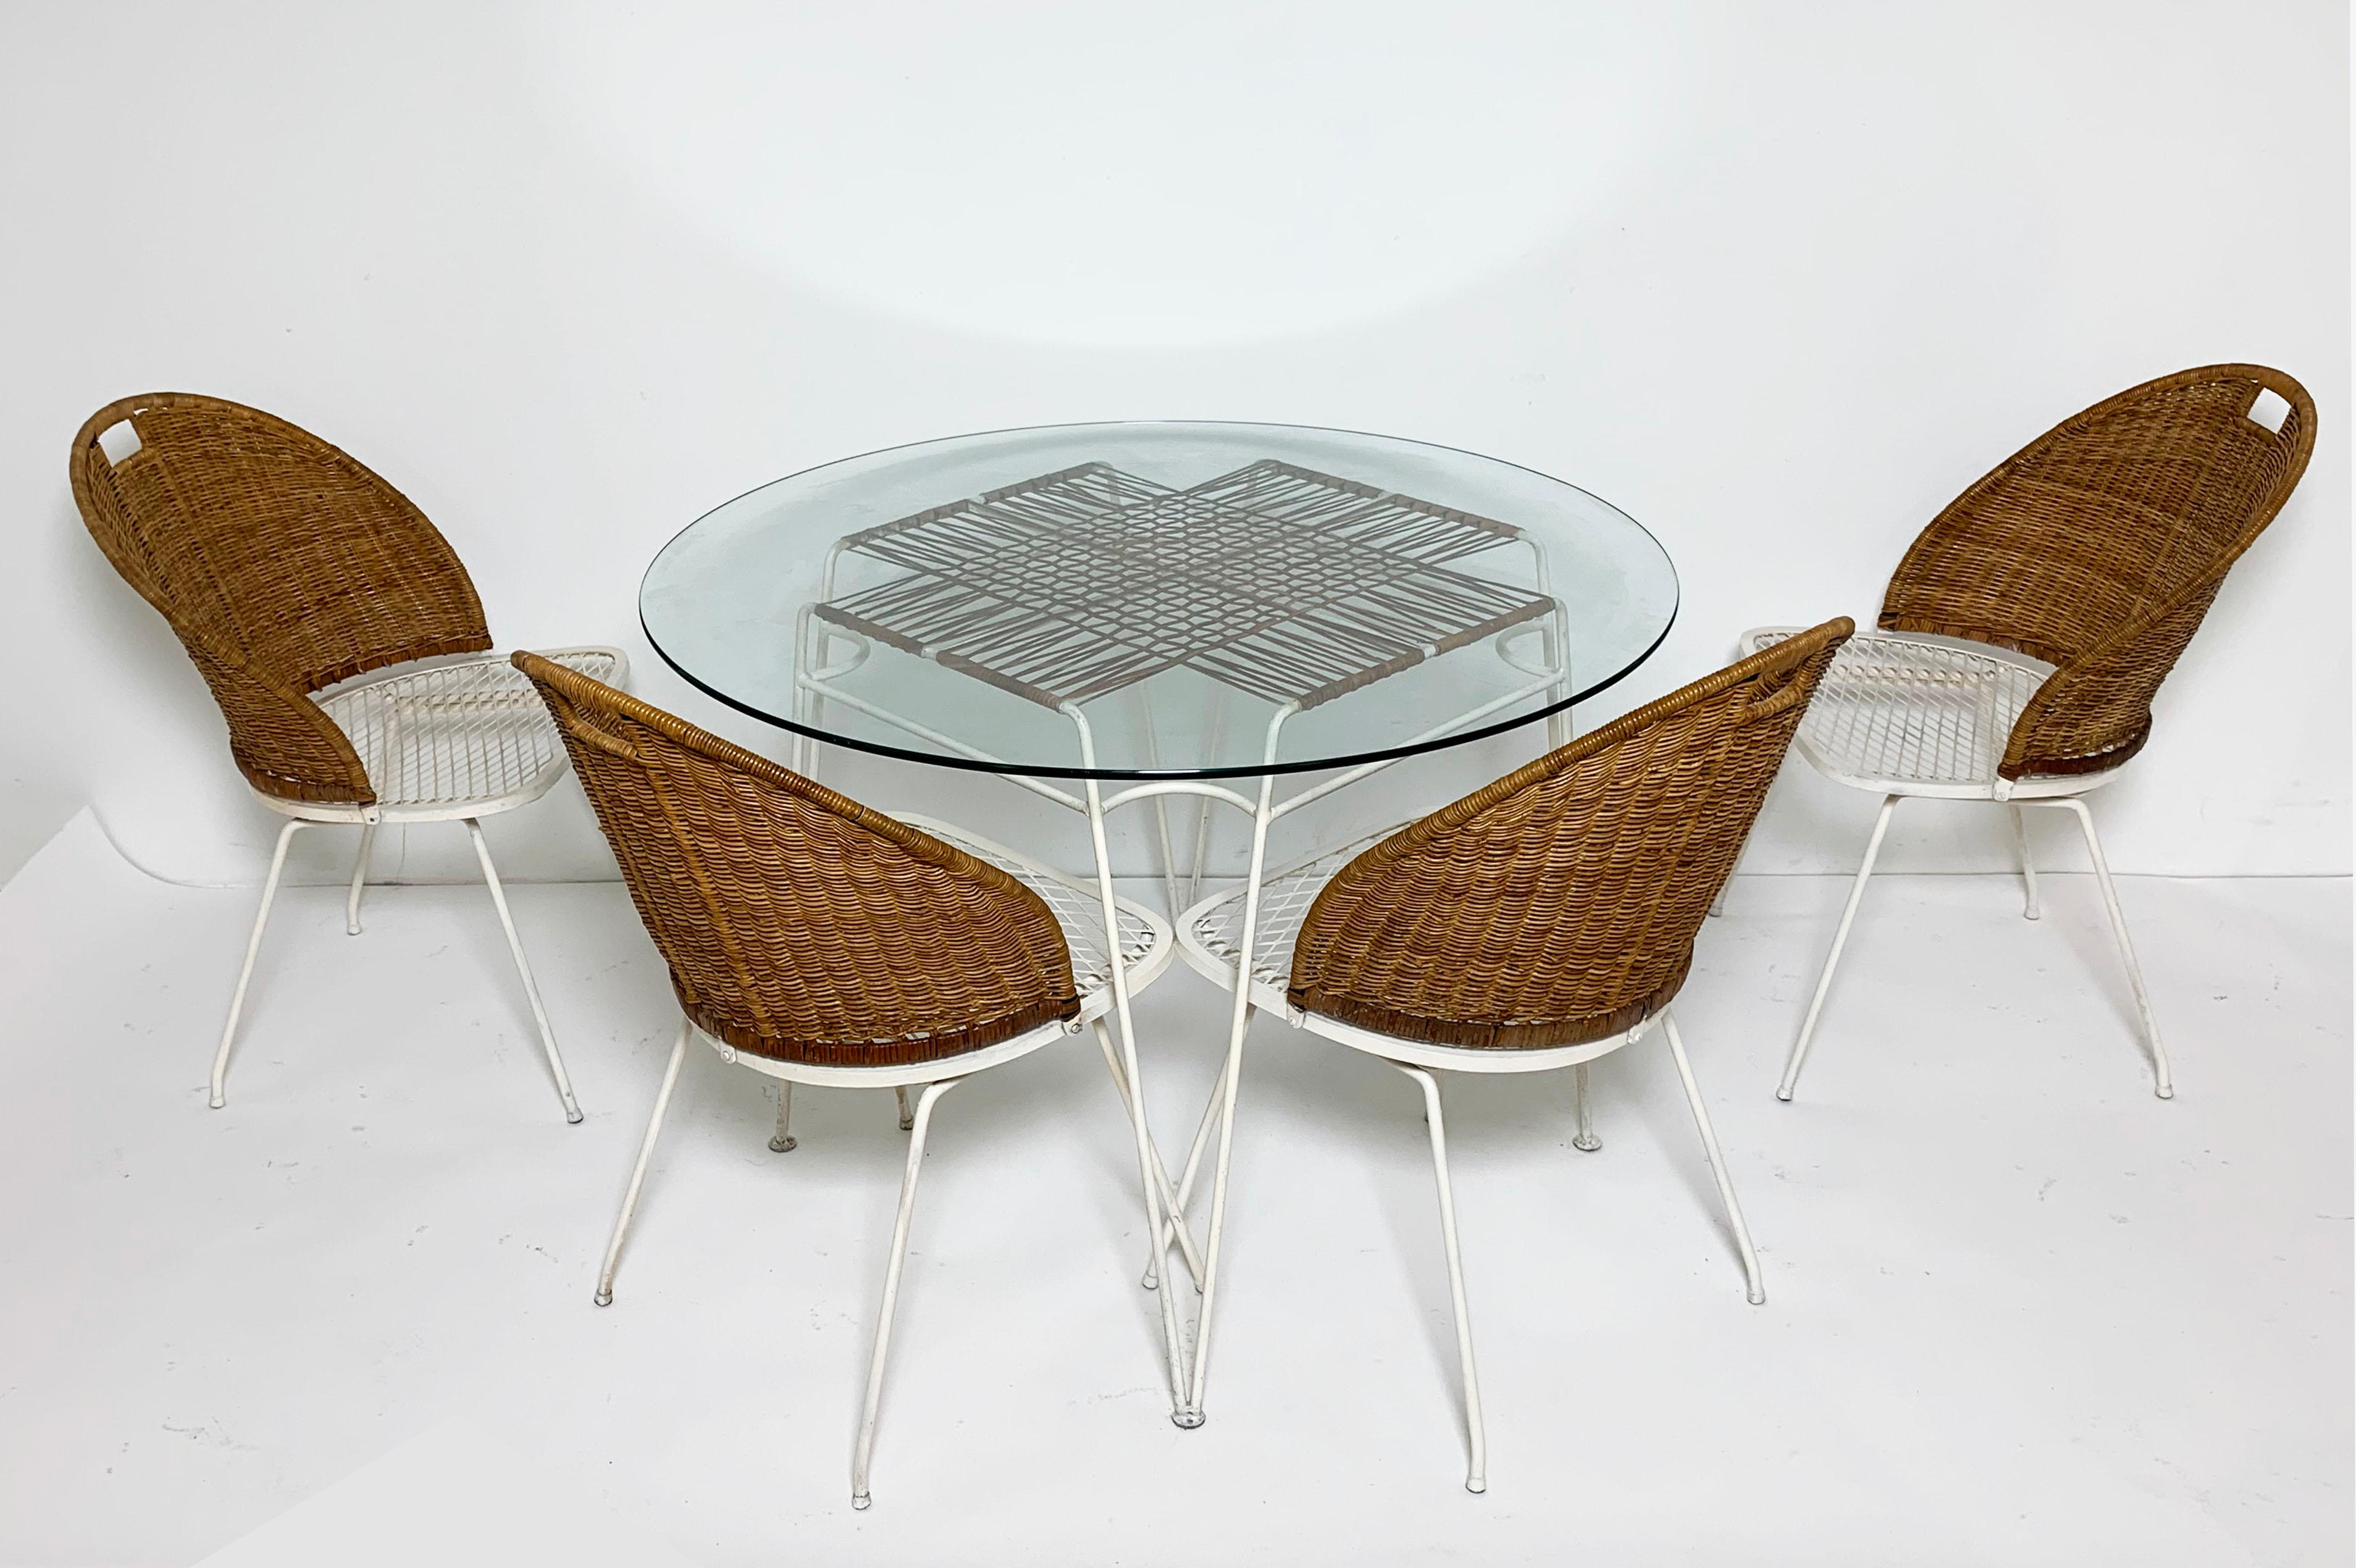 Classic outdoor seating designed by Maurizio Tempestini for John Salterini, ca. 1950s. Features four steel and wicker Neva-Rust chairs and a very rare cafe table featuring a grid of woven cane architecture beneath its glass top.

With glass top,